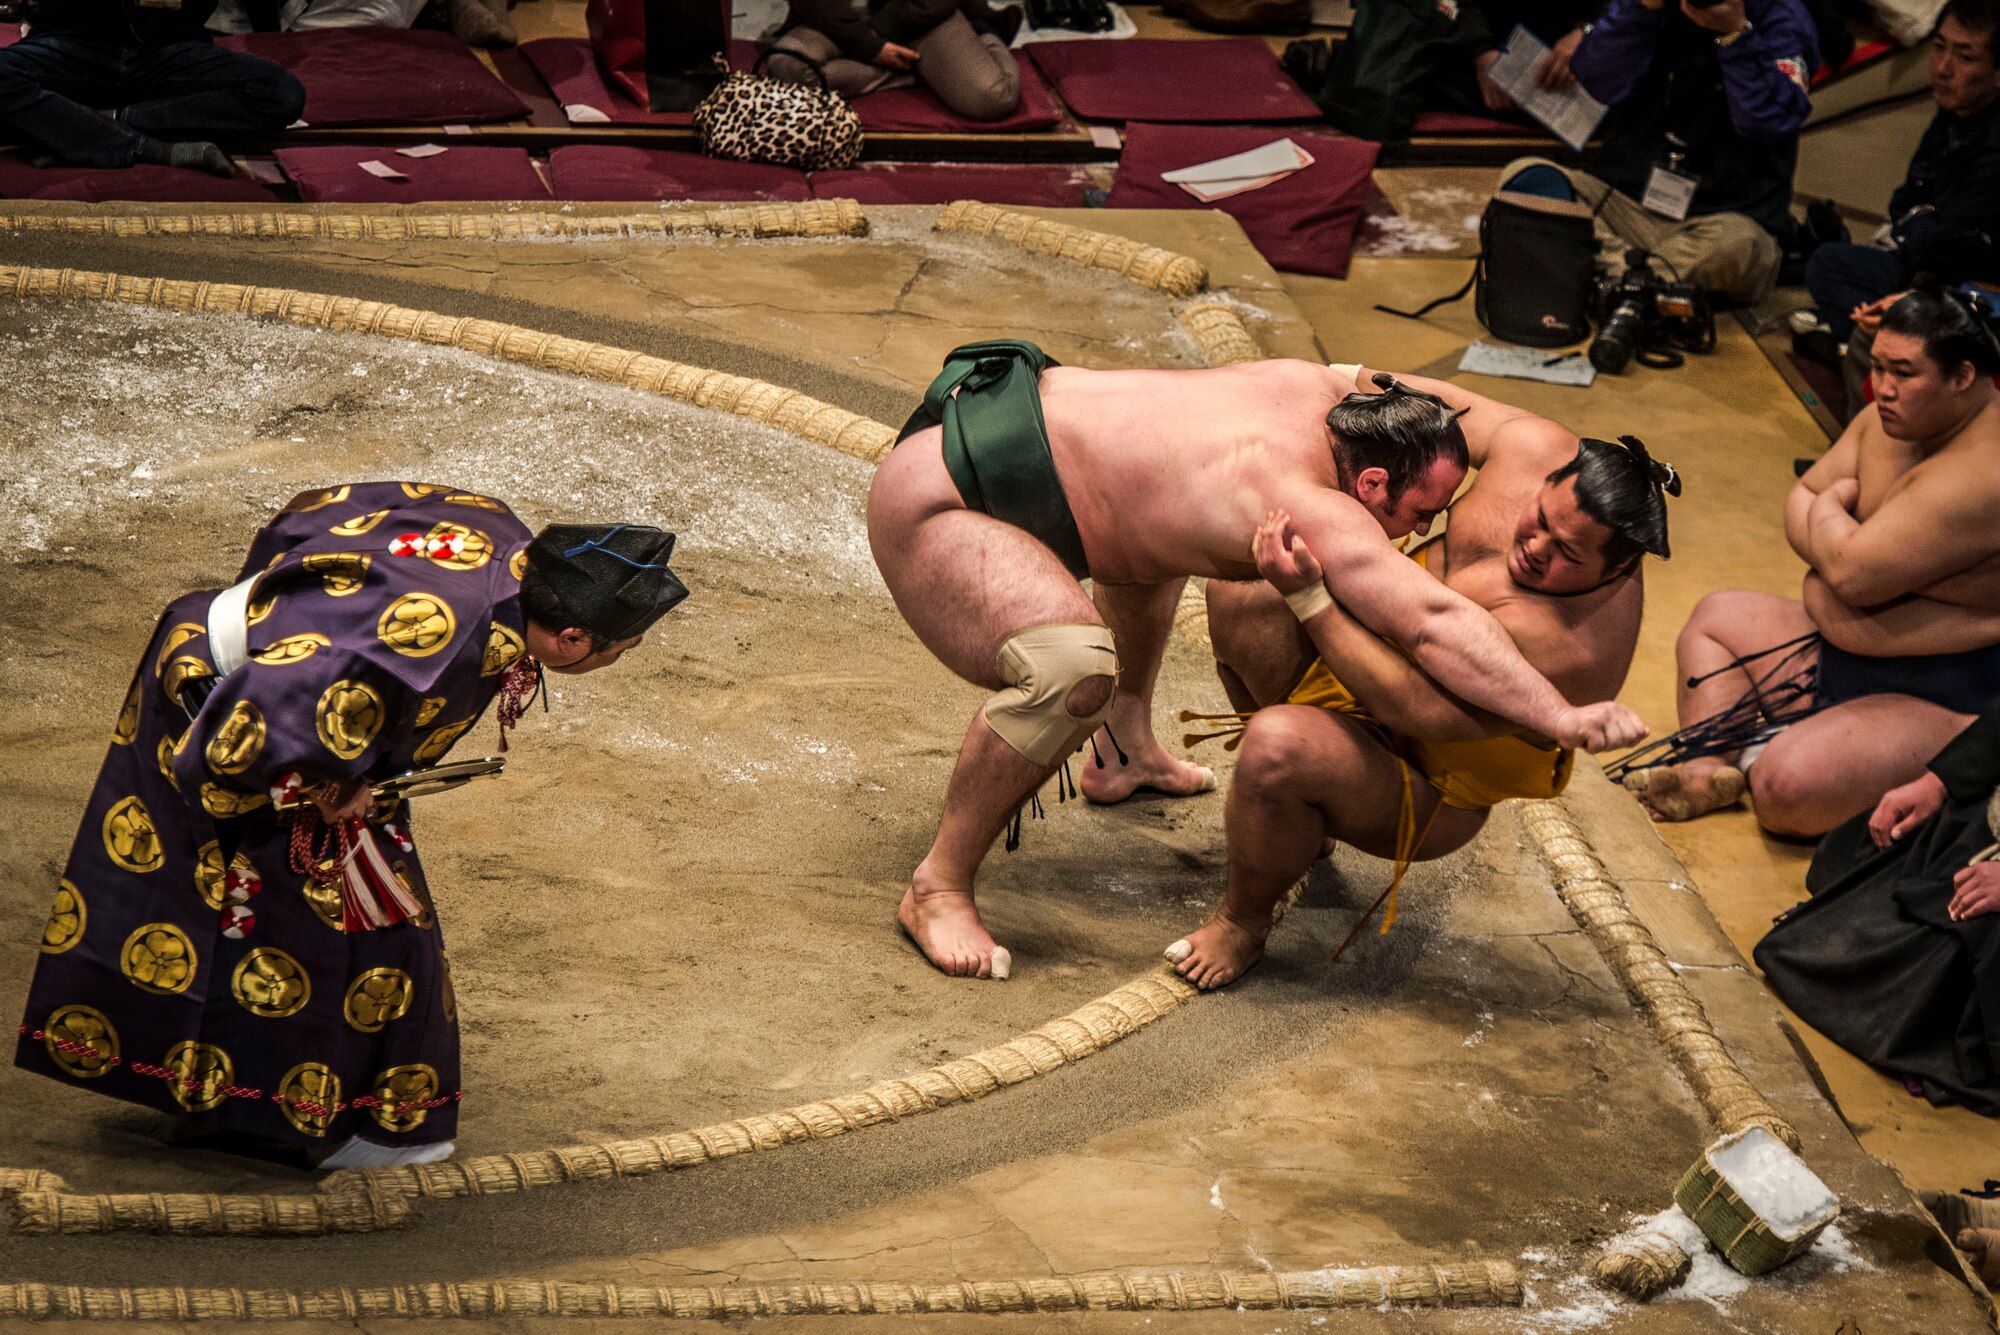 YOKOTA AIR BASE,Japan -- A Sumo wrestler pushes his opponent out of the ring during the Grand Sumo Tournament at the Ryogoku Kokugikan Sumo Hall in Tokyo, Feb. 10, 2013. During a Sumo match, two wrestlers, or rikishi, attempt to force one another out of a circular ring, or dohyo. A tournament features dozens of rikishi competing in an elimination-style roster to determine the champion. (U.S. Air Force photo by Capt. Raymond Geoffroy)